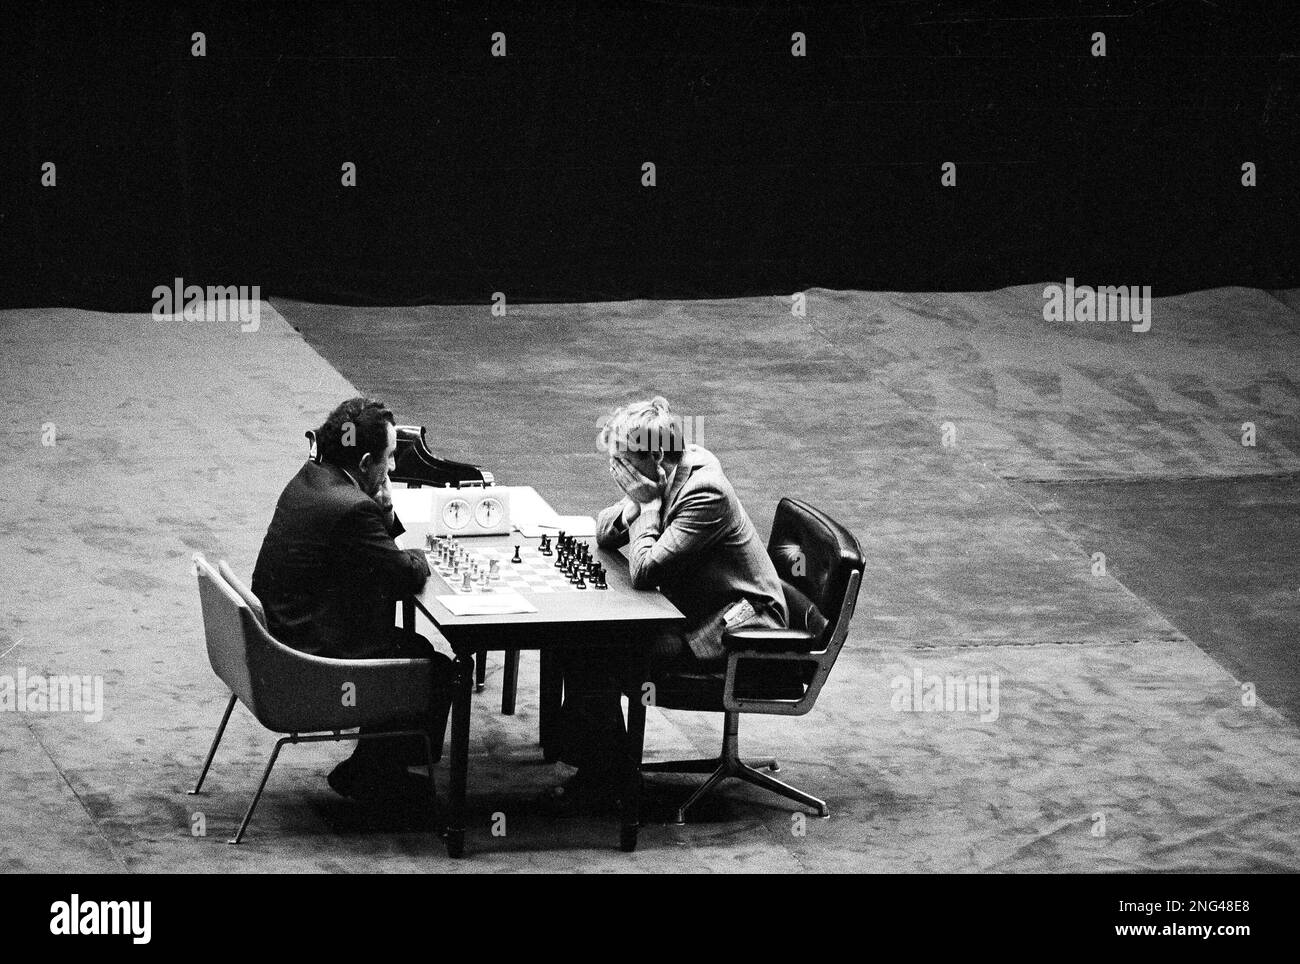 Could Petrosian have held against Fischer?